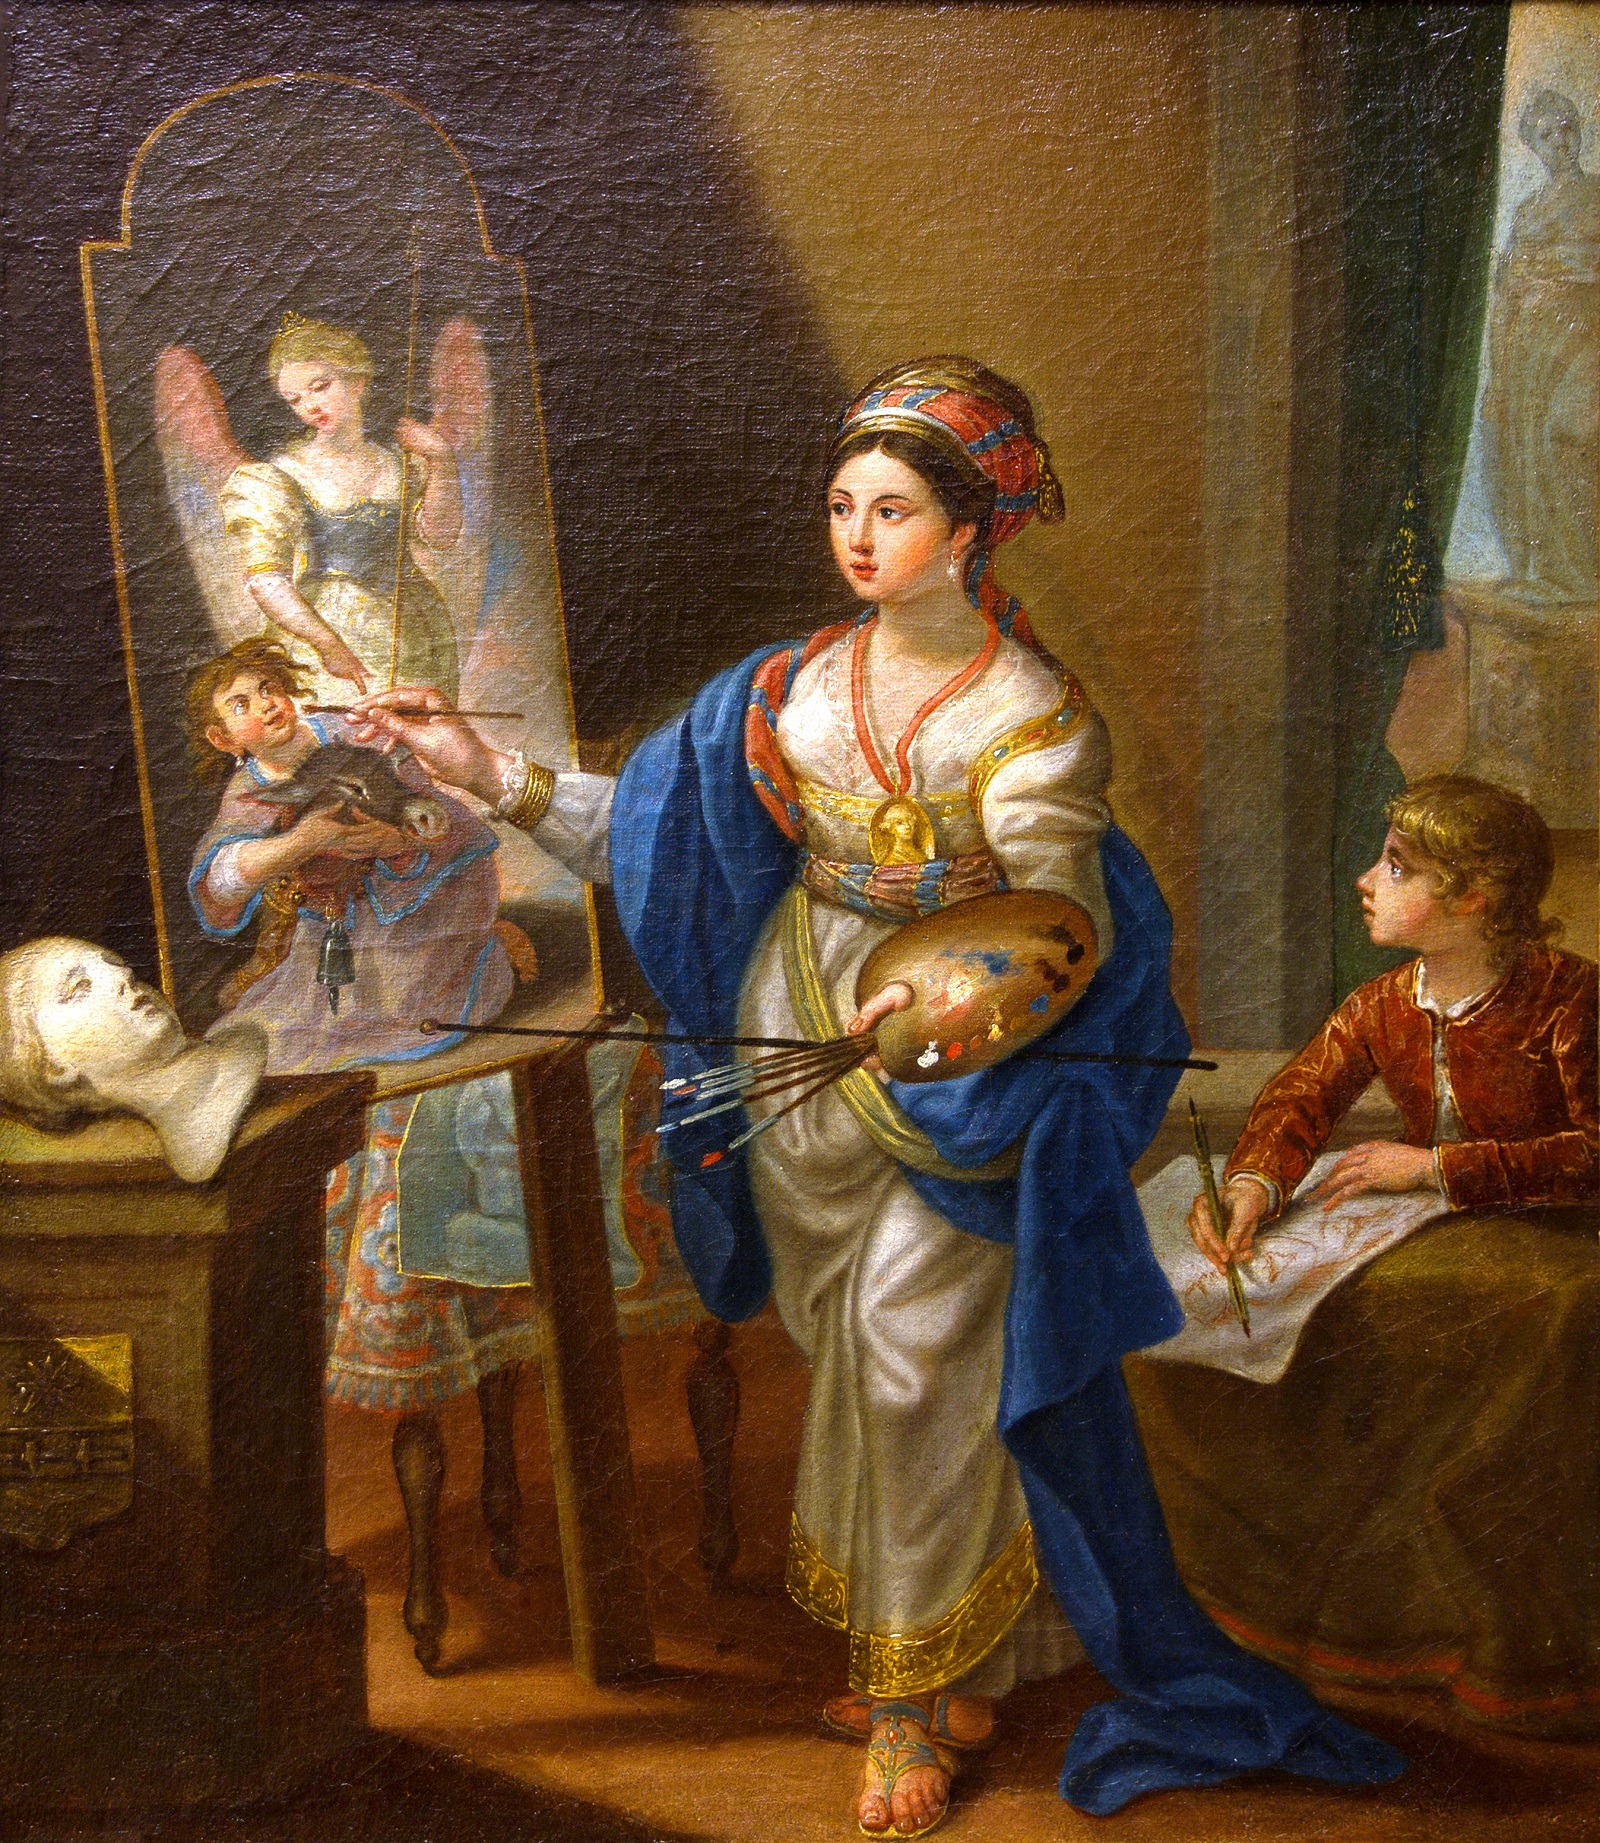 A portrait of the artist wearing an ambiguous costume with Eastern influences, standing in front of an easel holding paintbrushes and a palette. A young artist sits behind her, looking at the easel and drawing with a brush on a piece of paper.